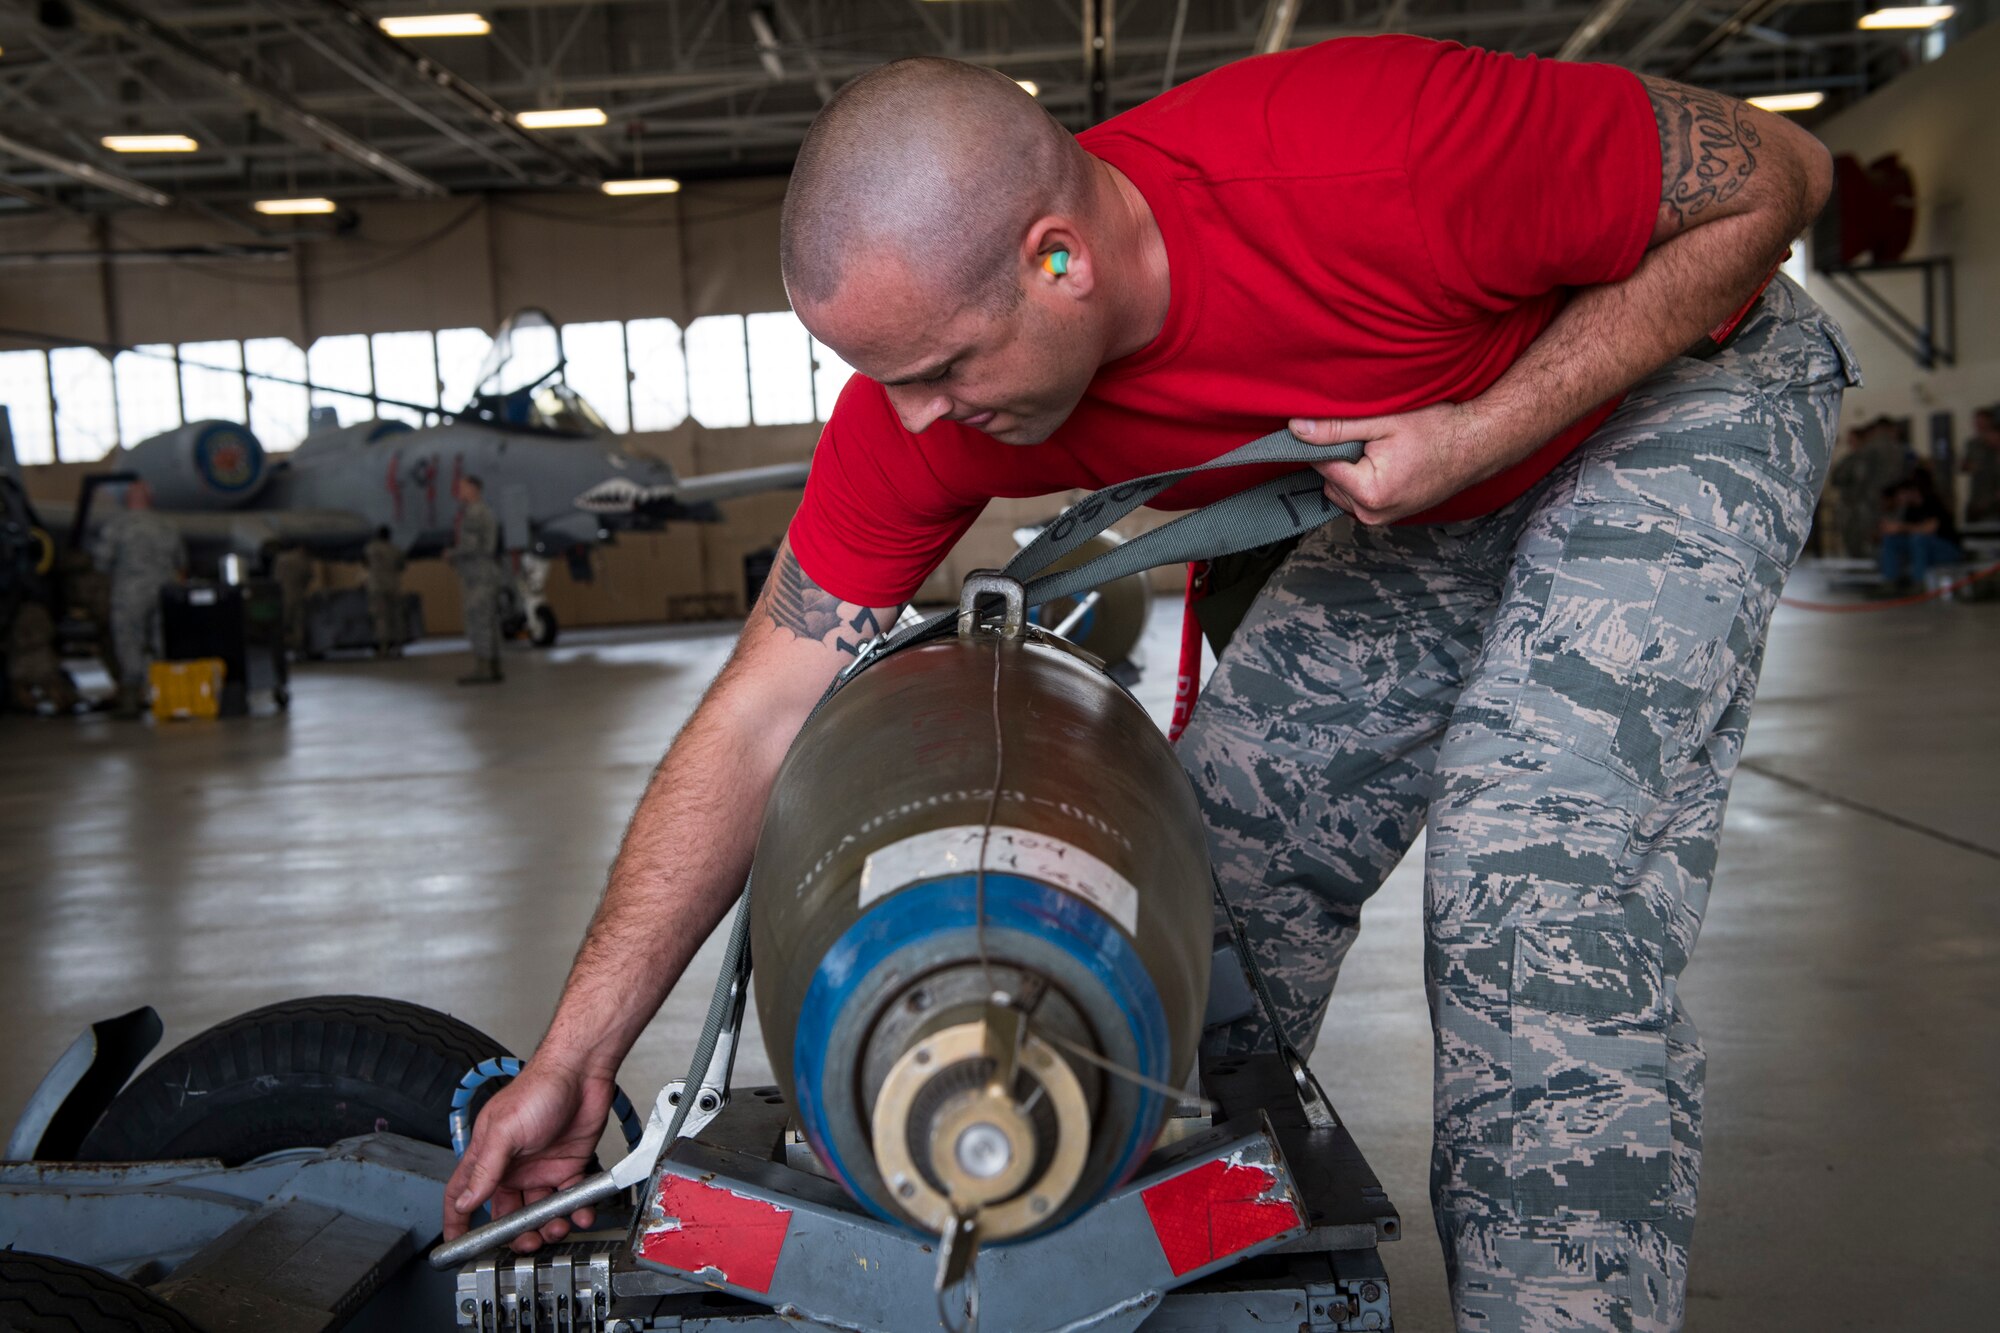 Staff Sgt. Kyle Palmer 75th Aircraft Maintenance Unit weapons load crewmember secures an inert munition on an A-10C Thunderbolt II during a weapons load competition, April 9, 2018, at Moody Air Force Base, Ga. The 75th and 74th AMUs went head to head with each crew competing to load three munitions onto an A-10 quicker and with less discrepancies than the other. Crews were also judged on dress and appearance and a written test based on munitions knowledge. (U.S. Air Force photo by Senior Airman Janiqua P. Robinson)